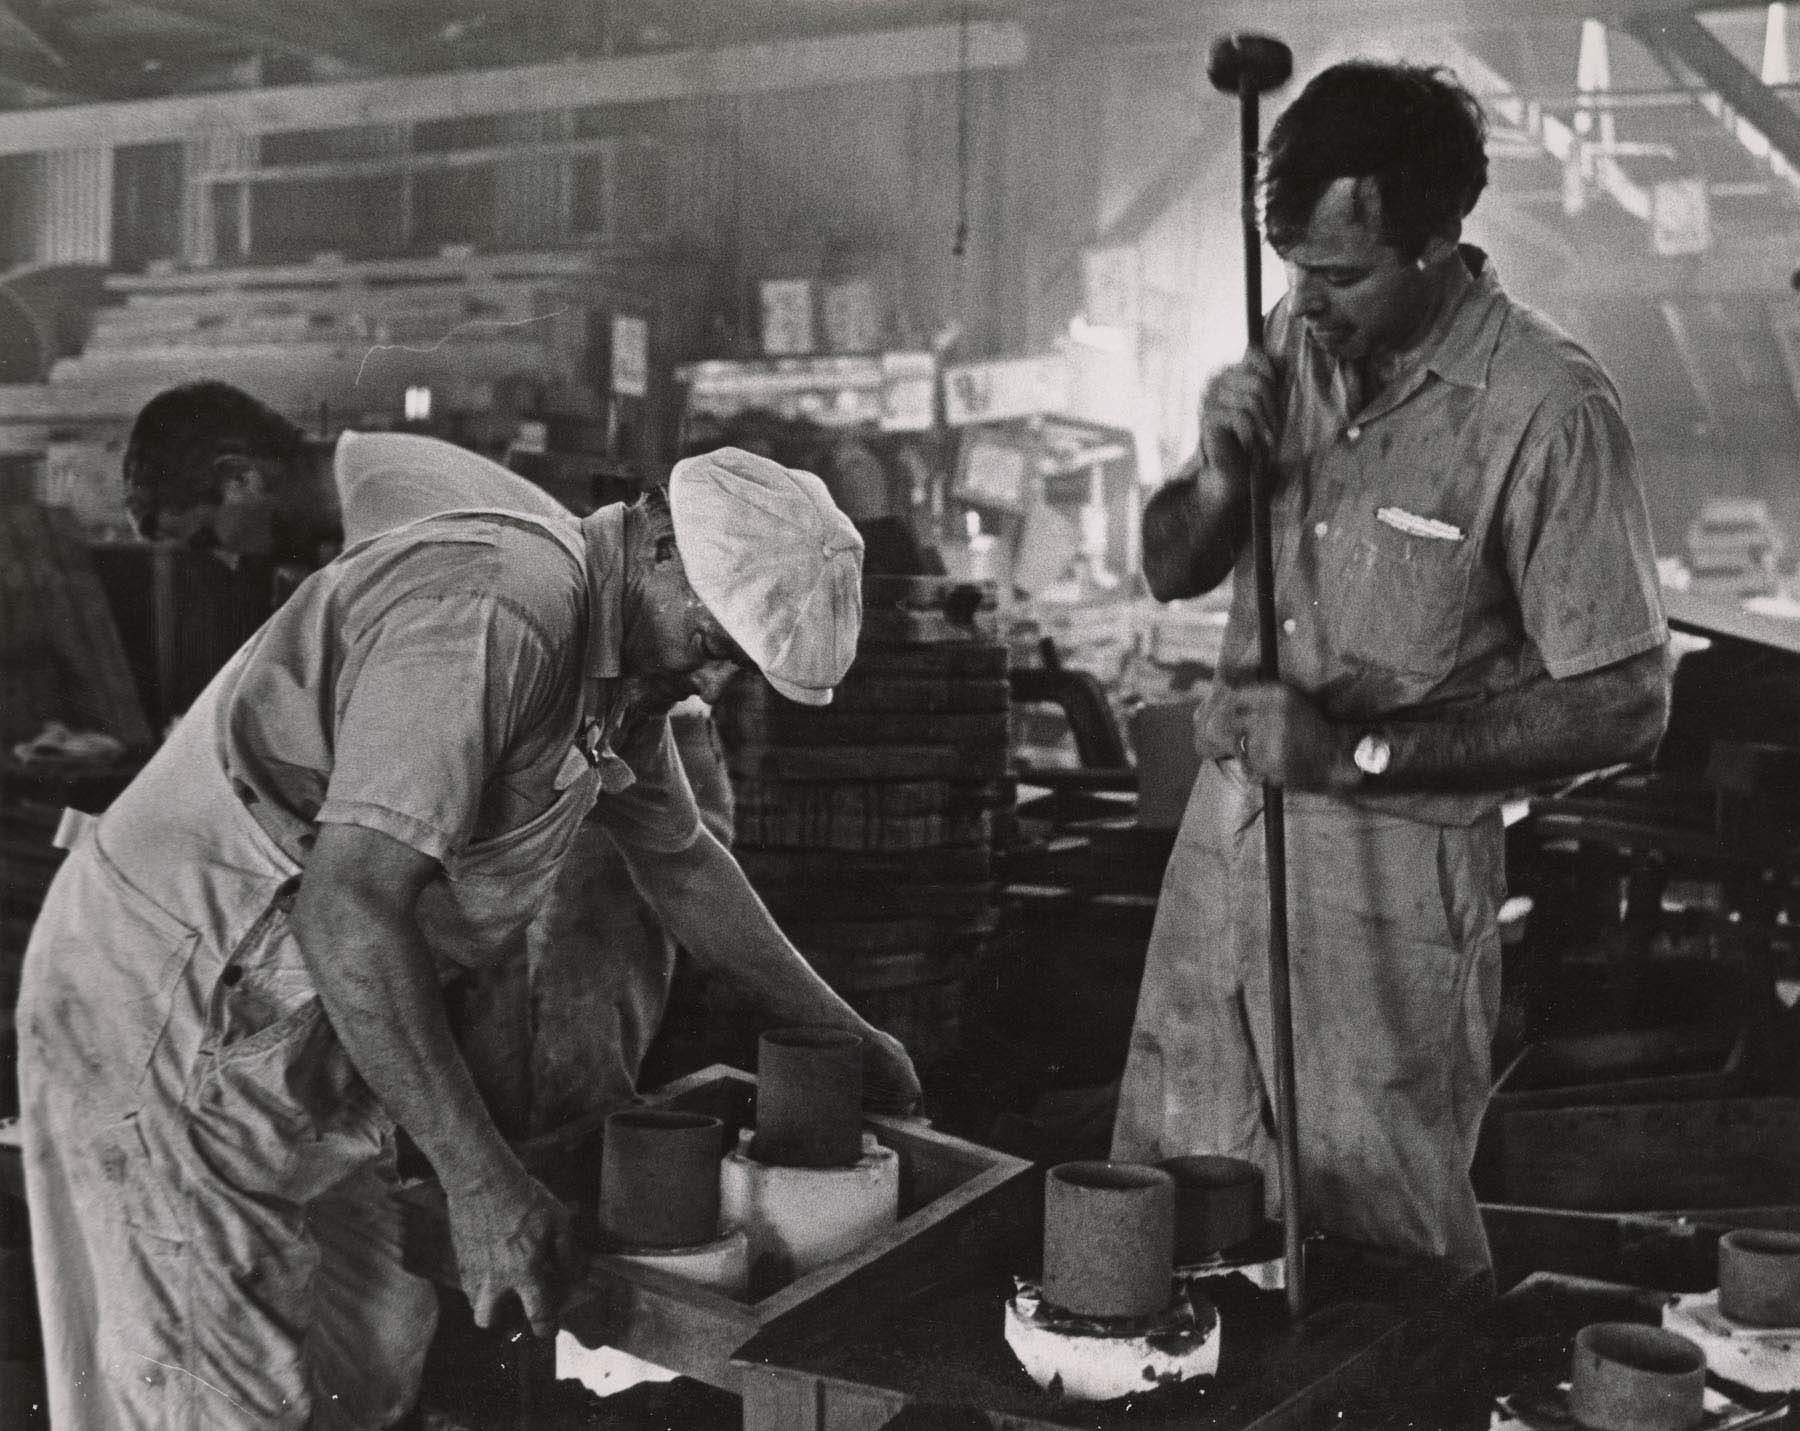 A black-and-white photograph of two men working on a project in a steel foundry.